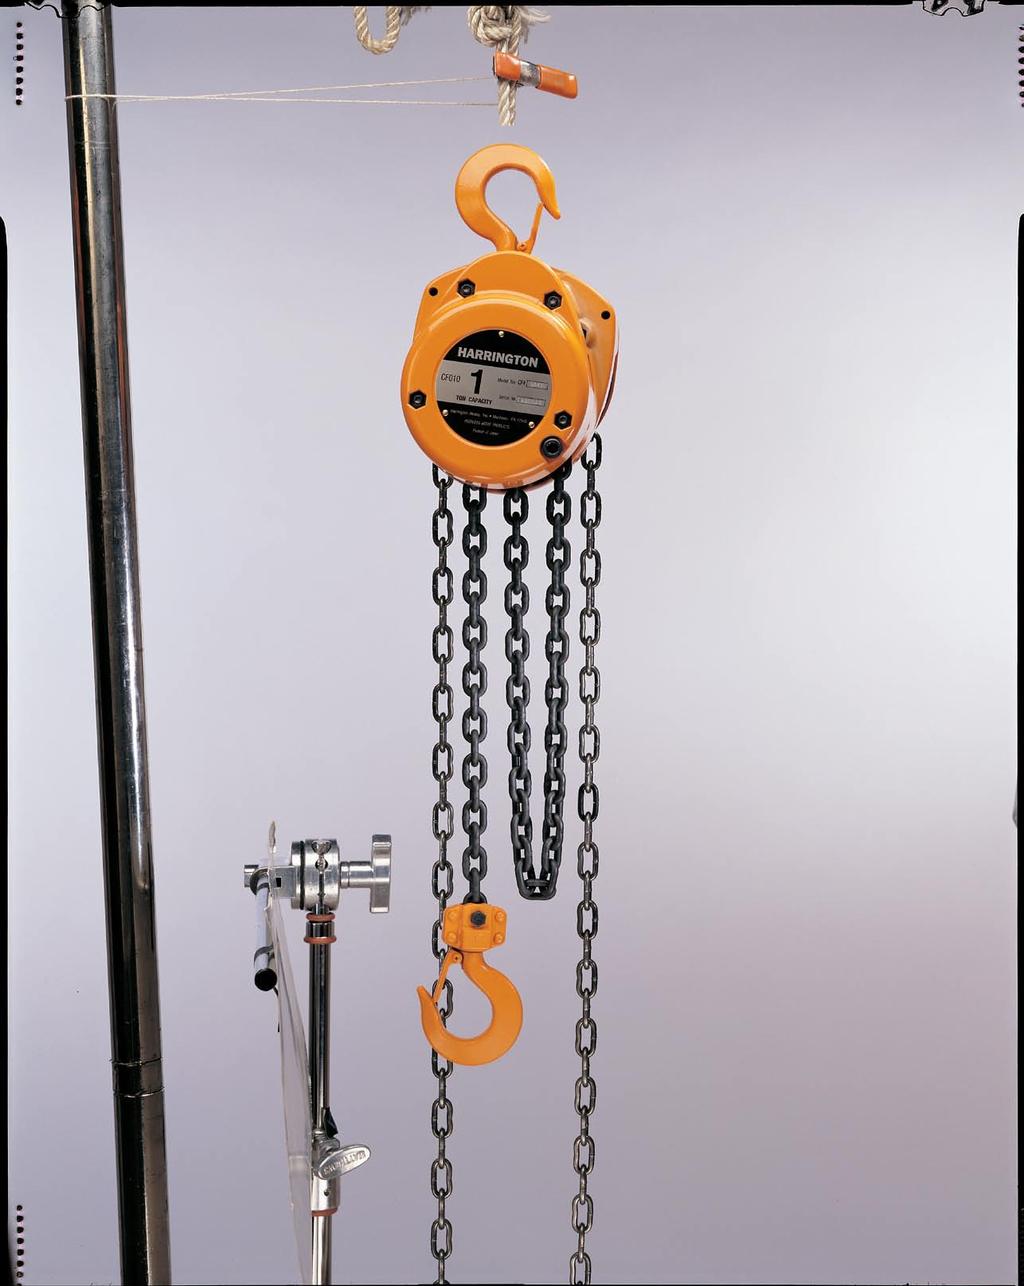 CF Hand Chain Hoist 1 2 through 5 Ton capacity Harrington CF hand chain hoists give you a practical alternative thanks to an economical design using fewer parts for trouble-free service.